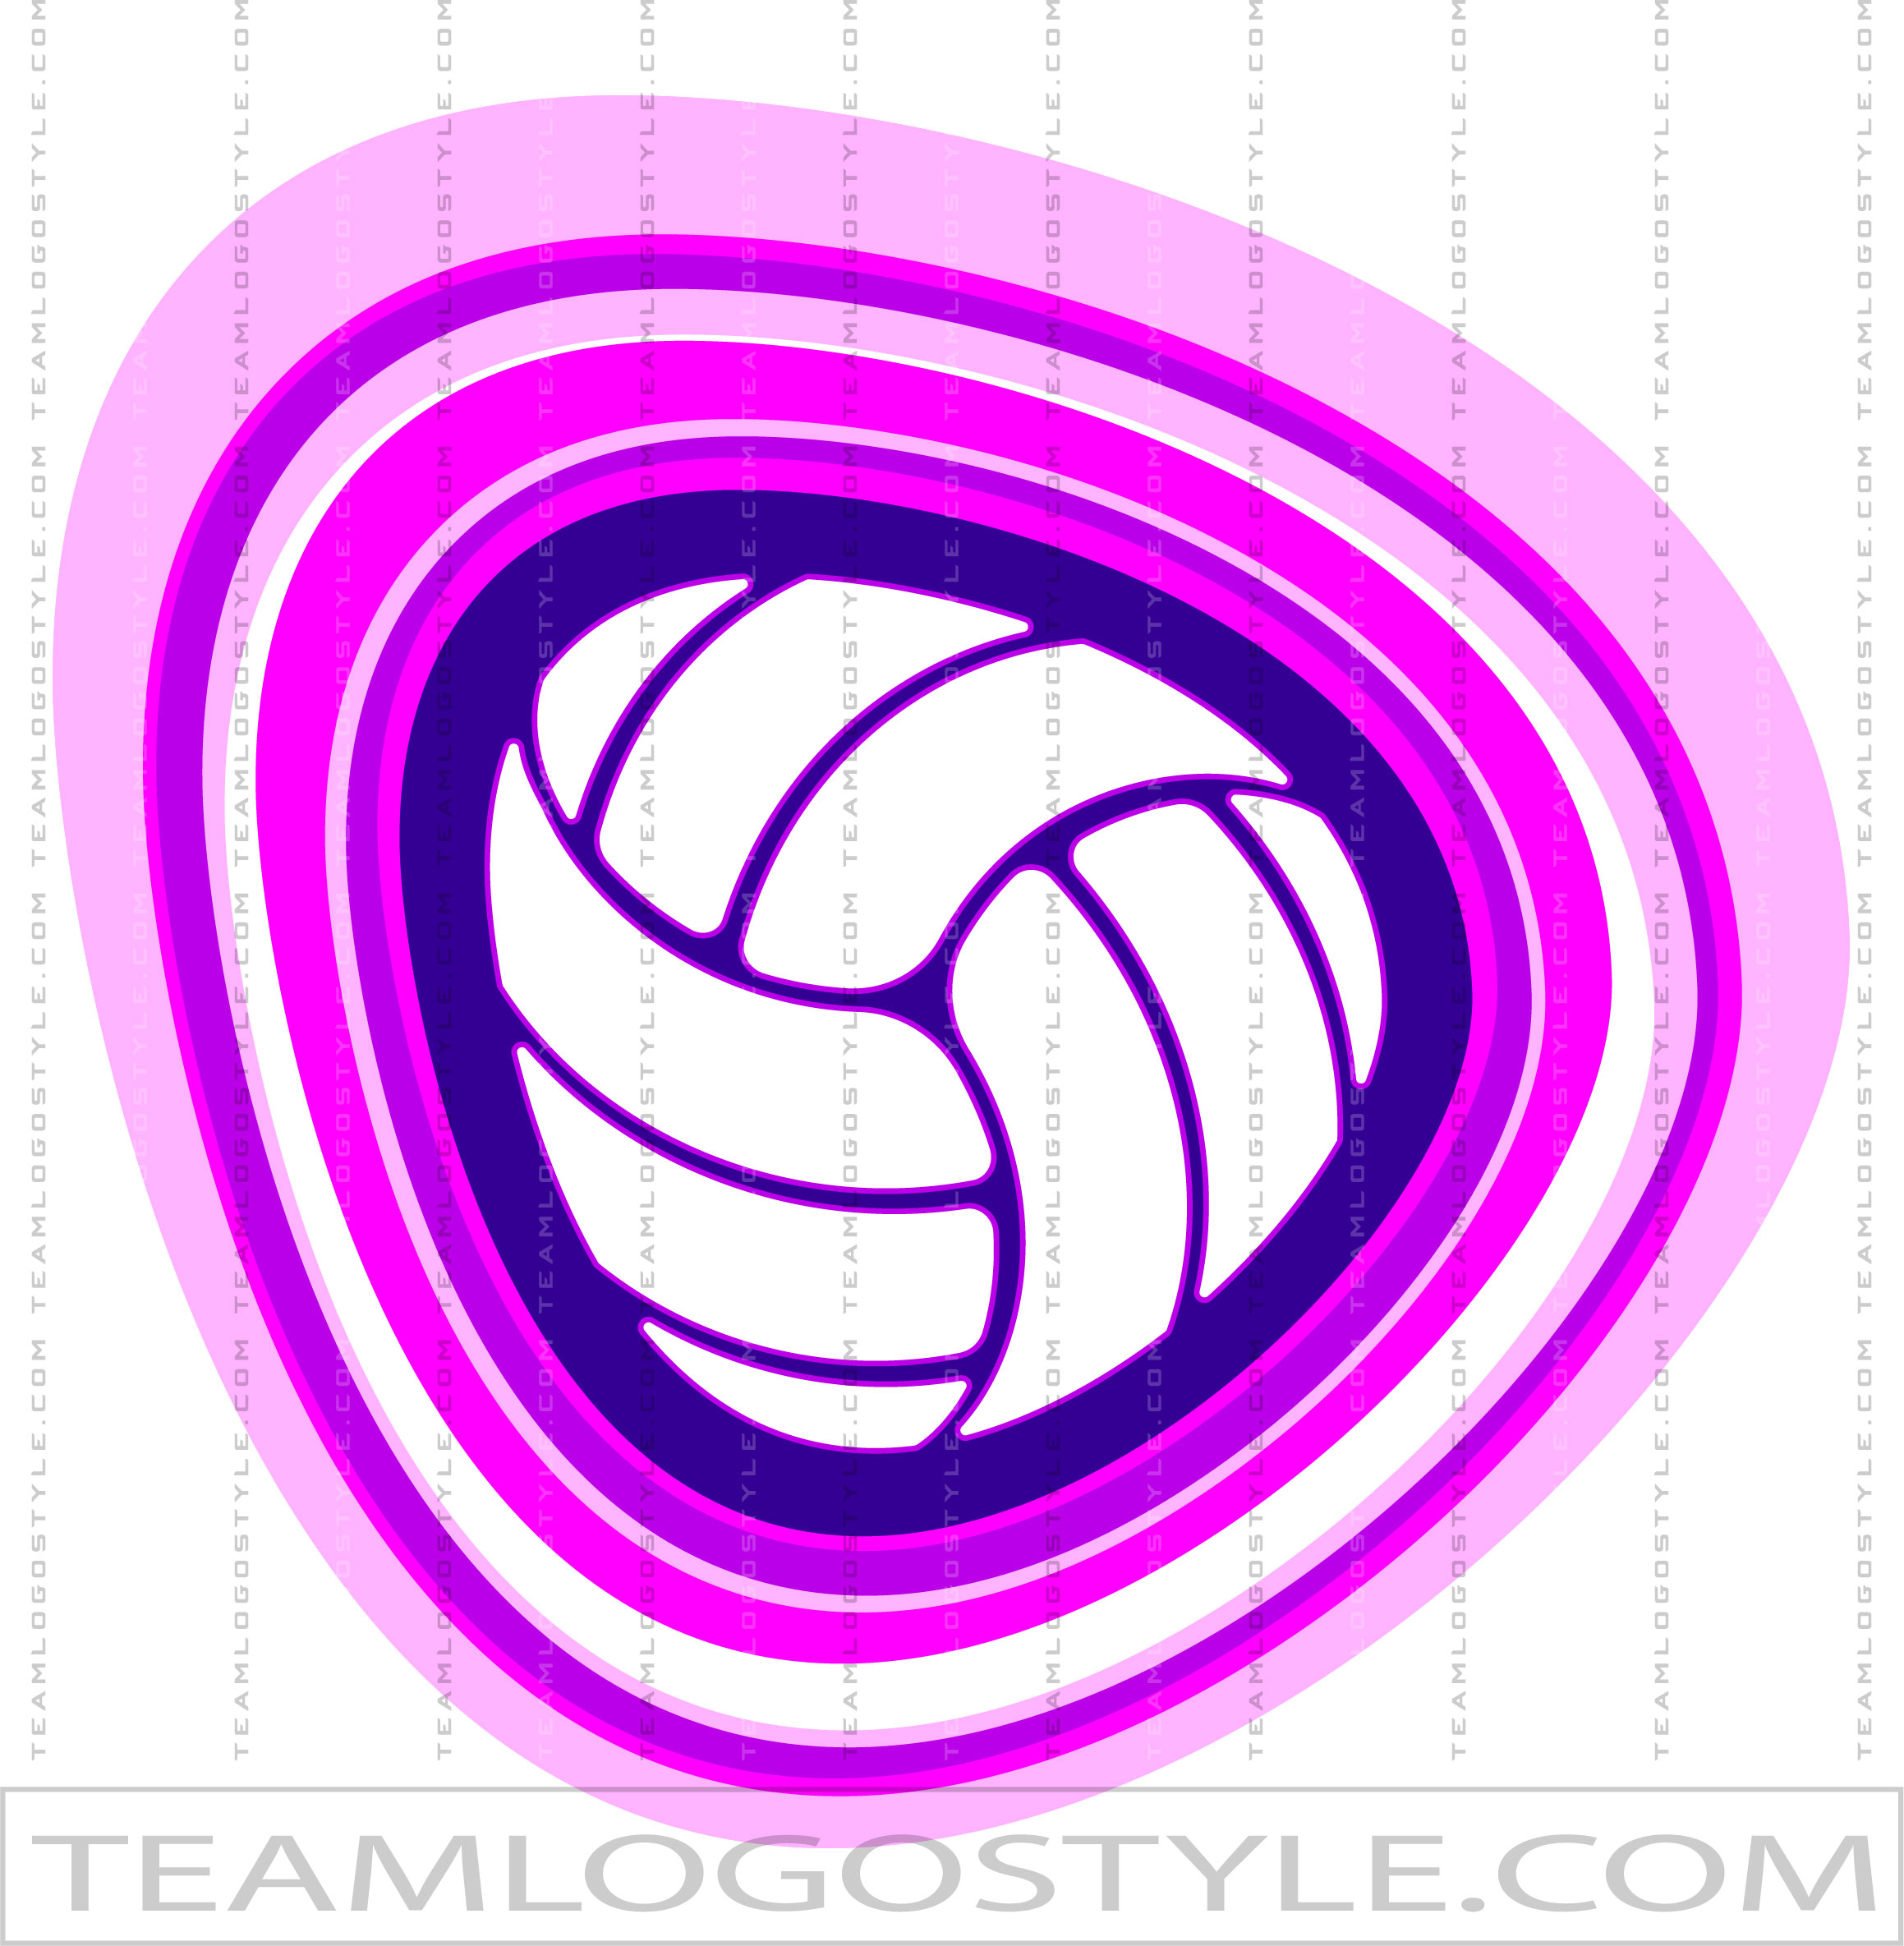 Volleyball Clip Art | Vector Format | AI JPG EPS PNG